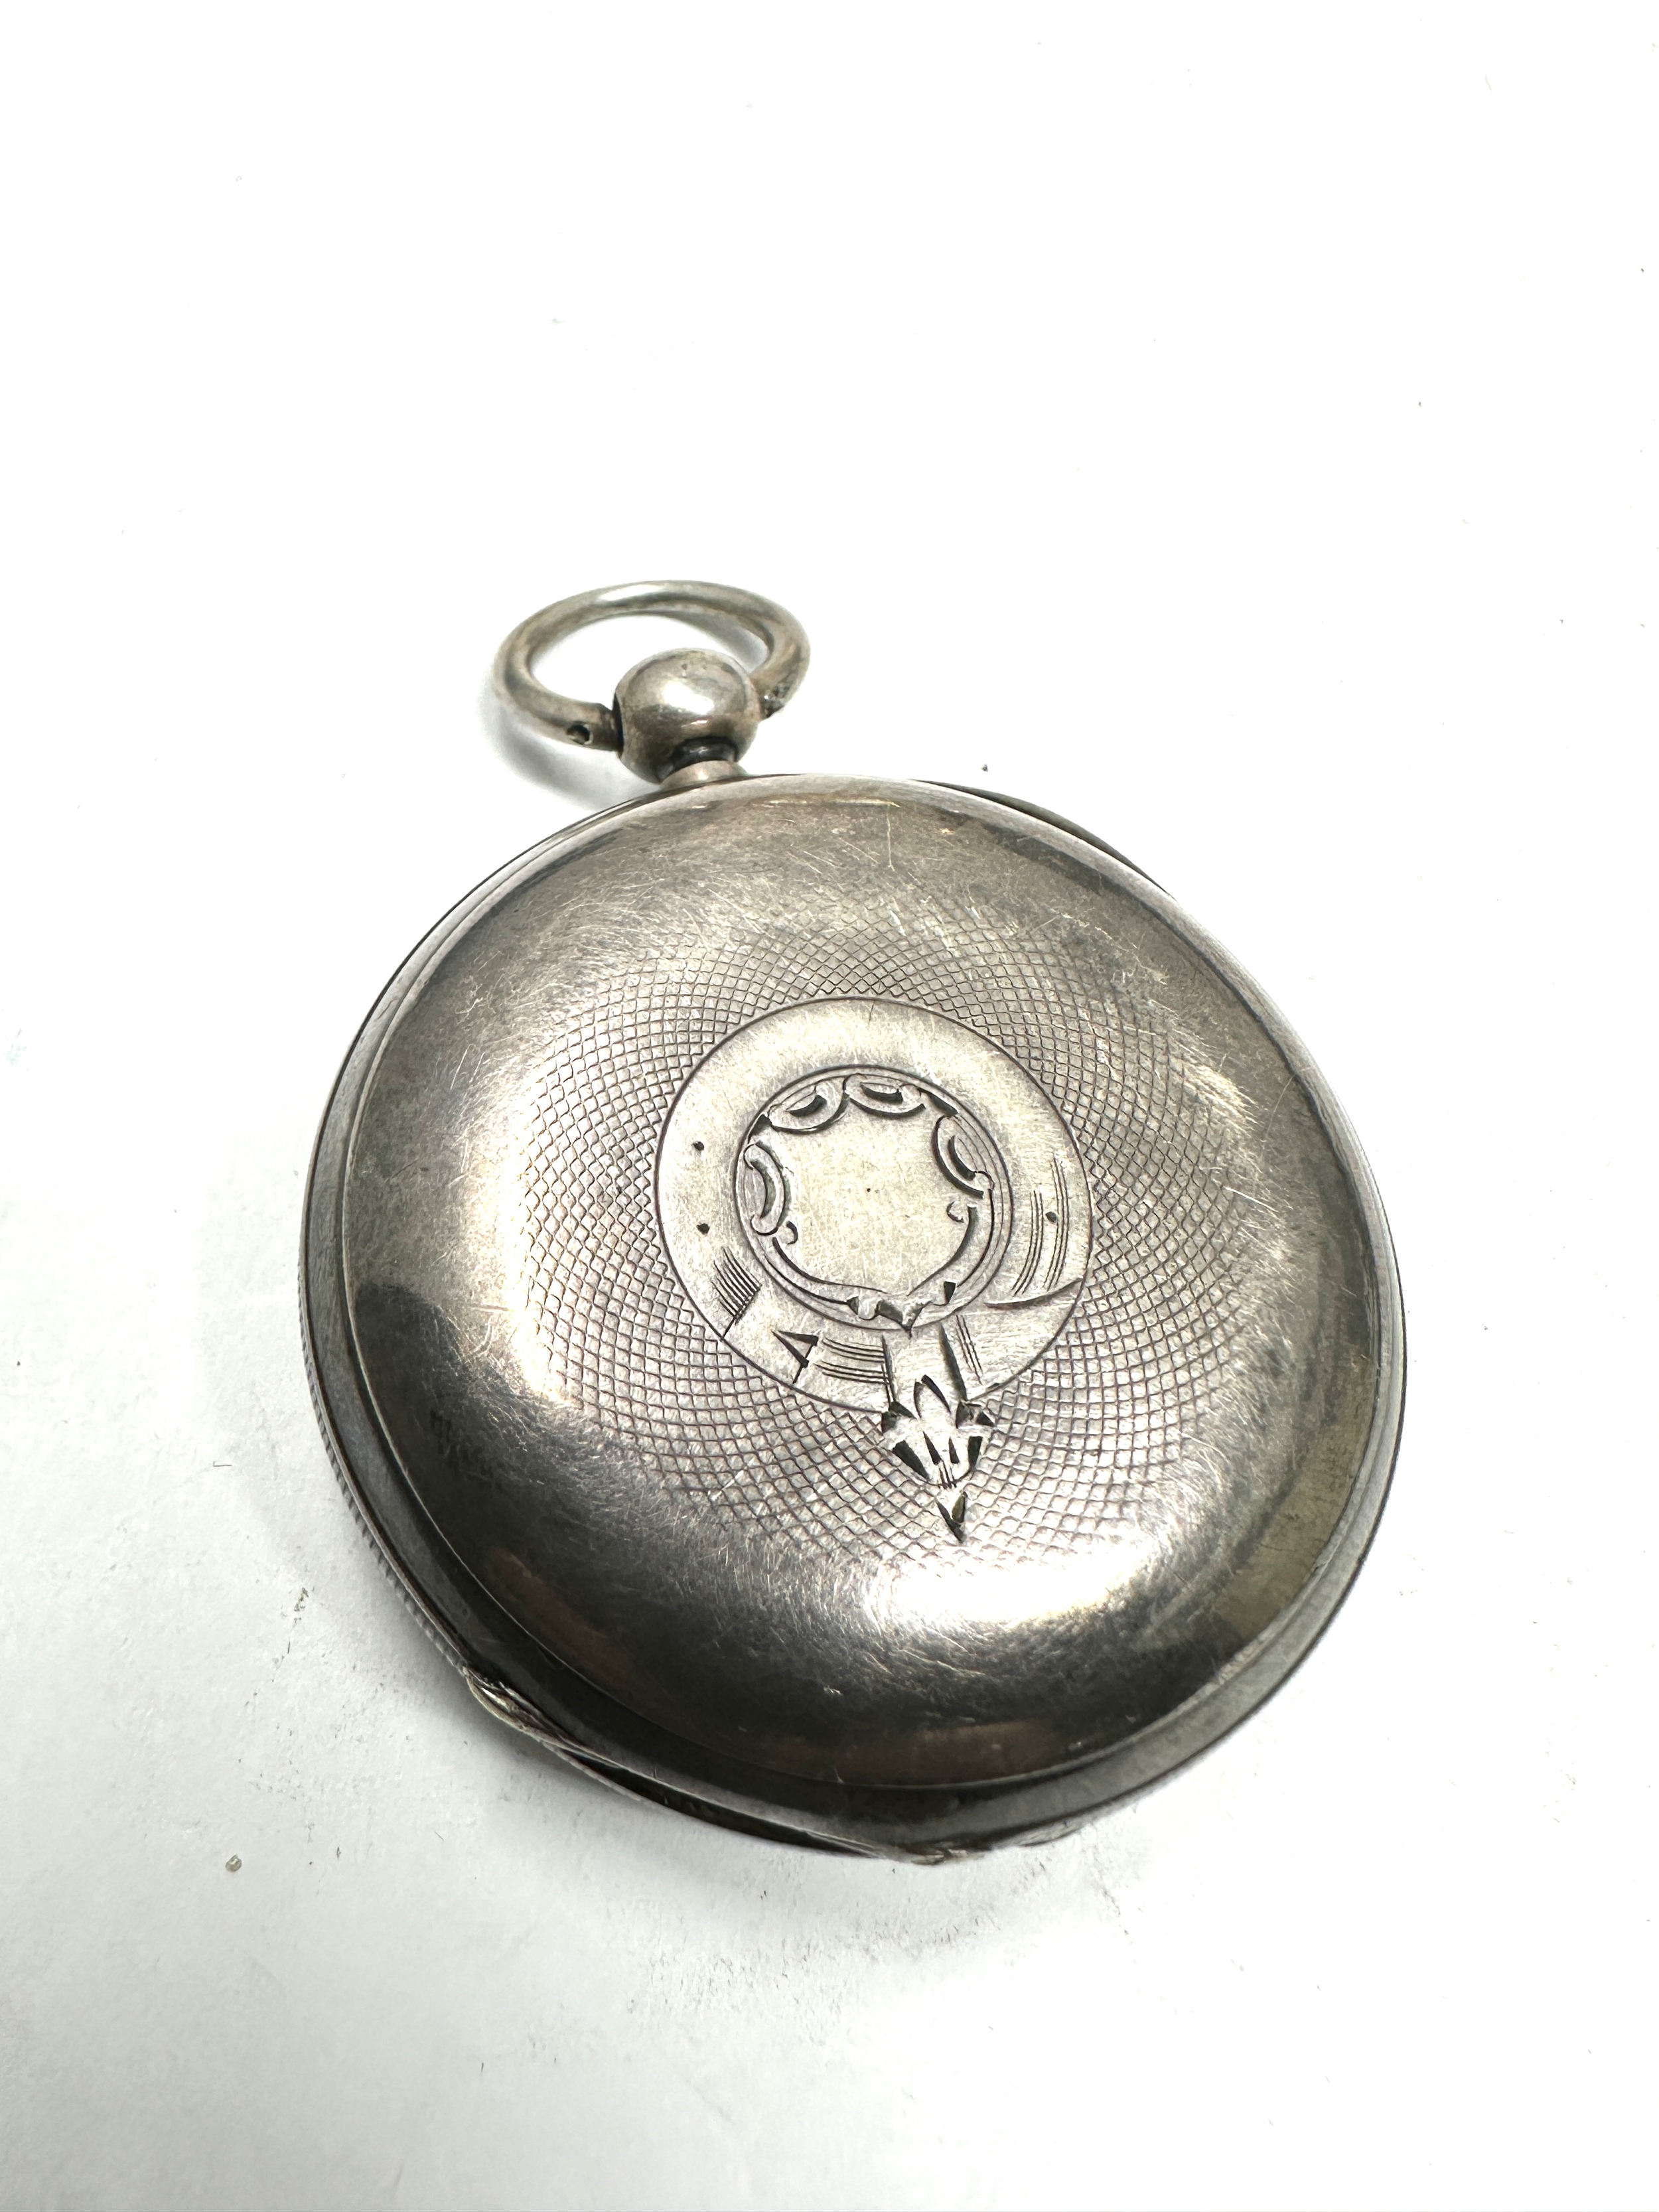 Antique silver open face pocket watch waltham mass movement the watch is ticking - Image 2 of 5